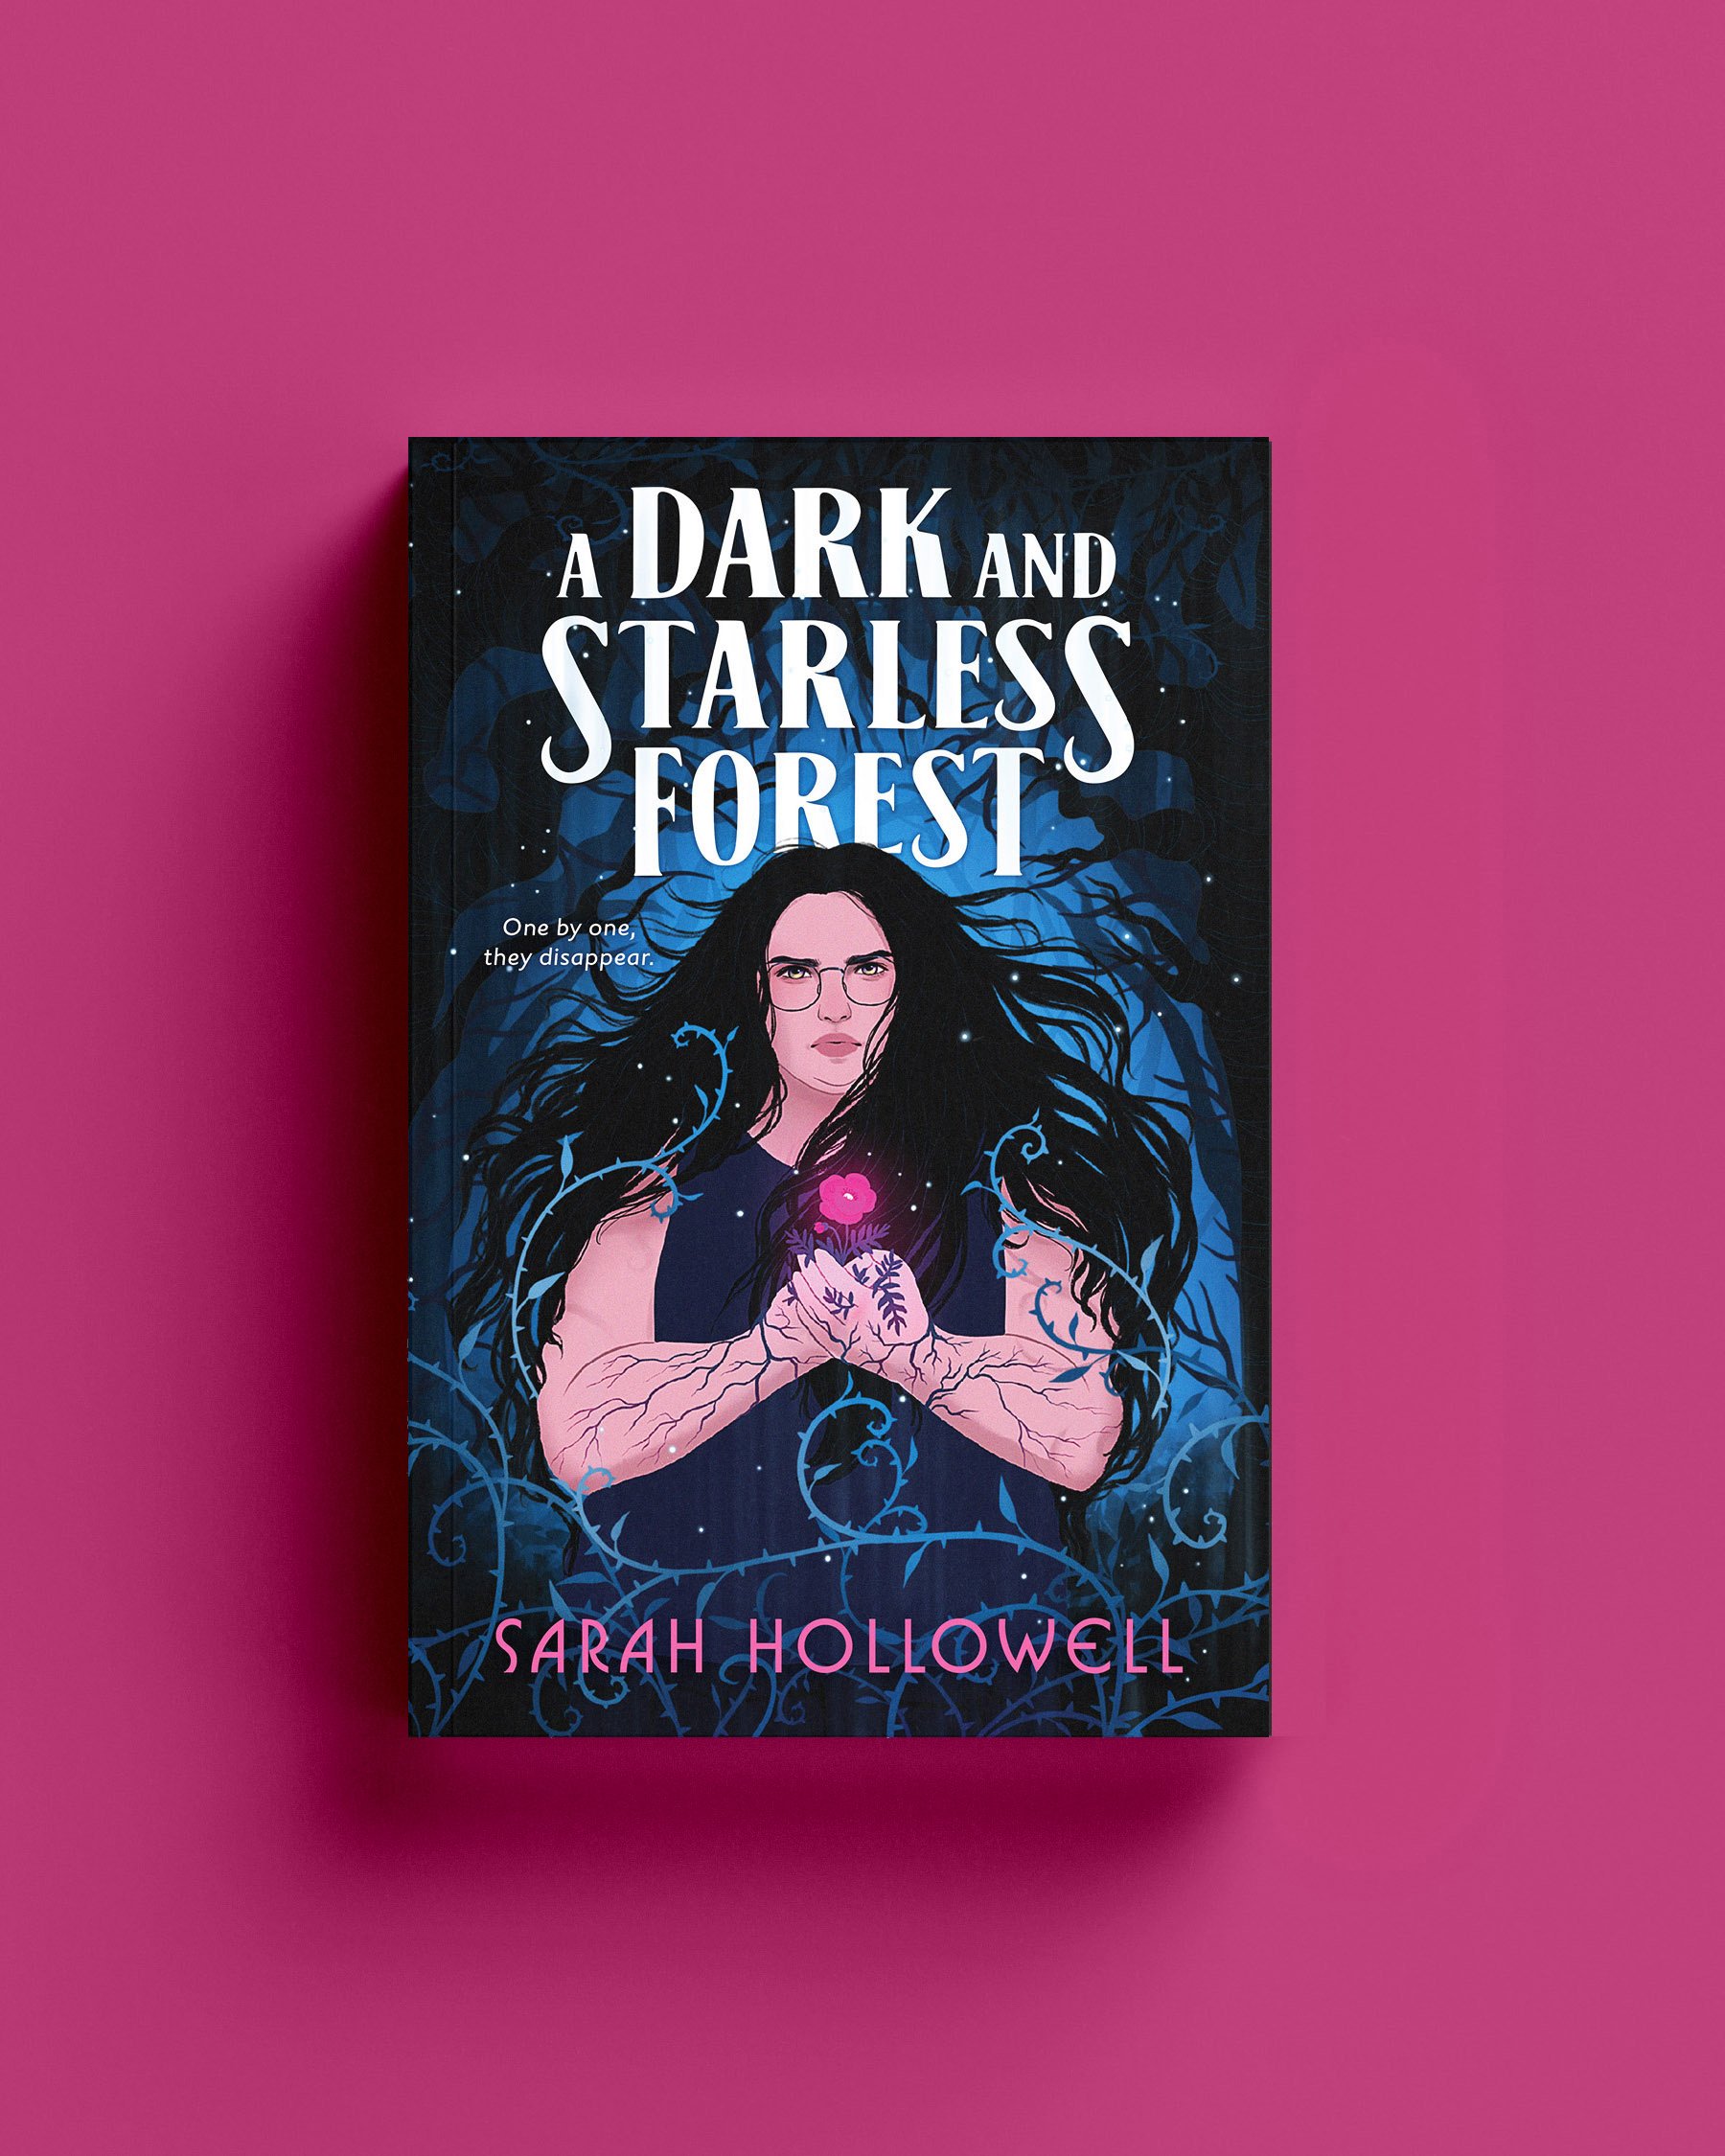 Cover for "A Dark and Starless Forest" by Sarah Hollowell